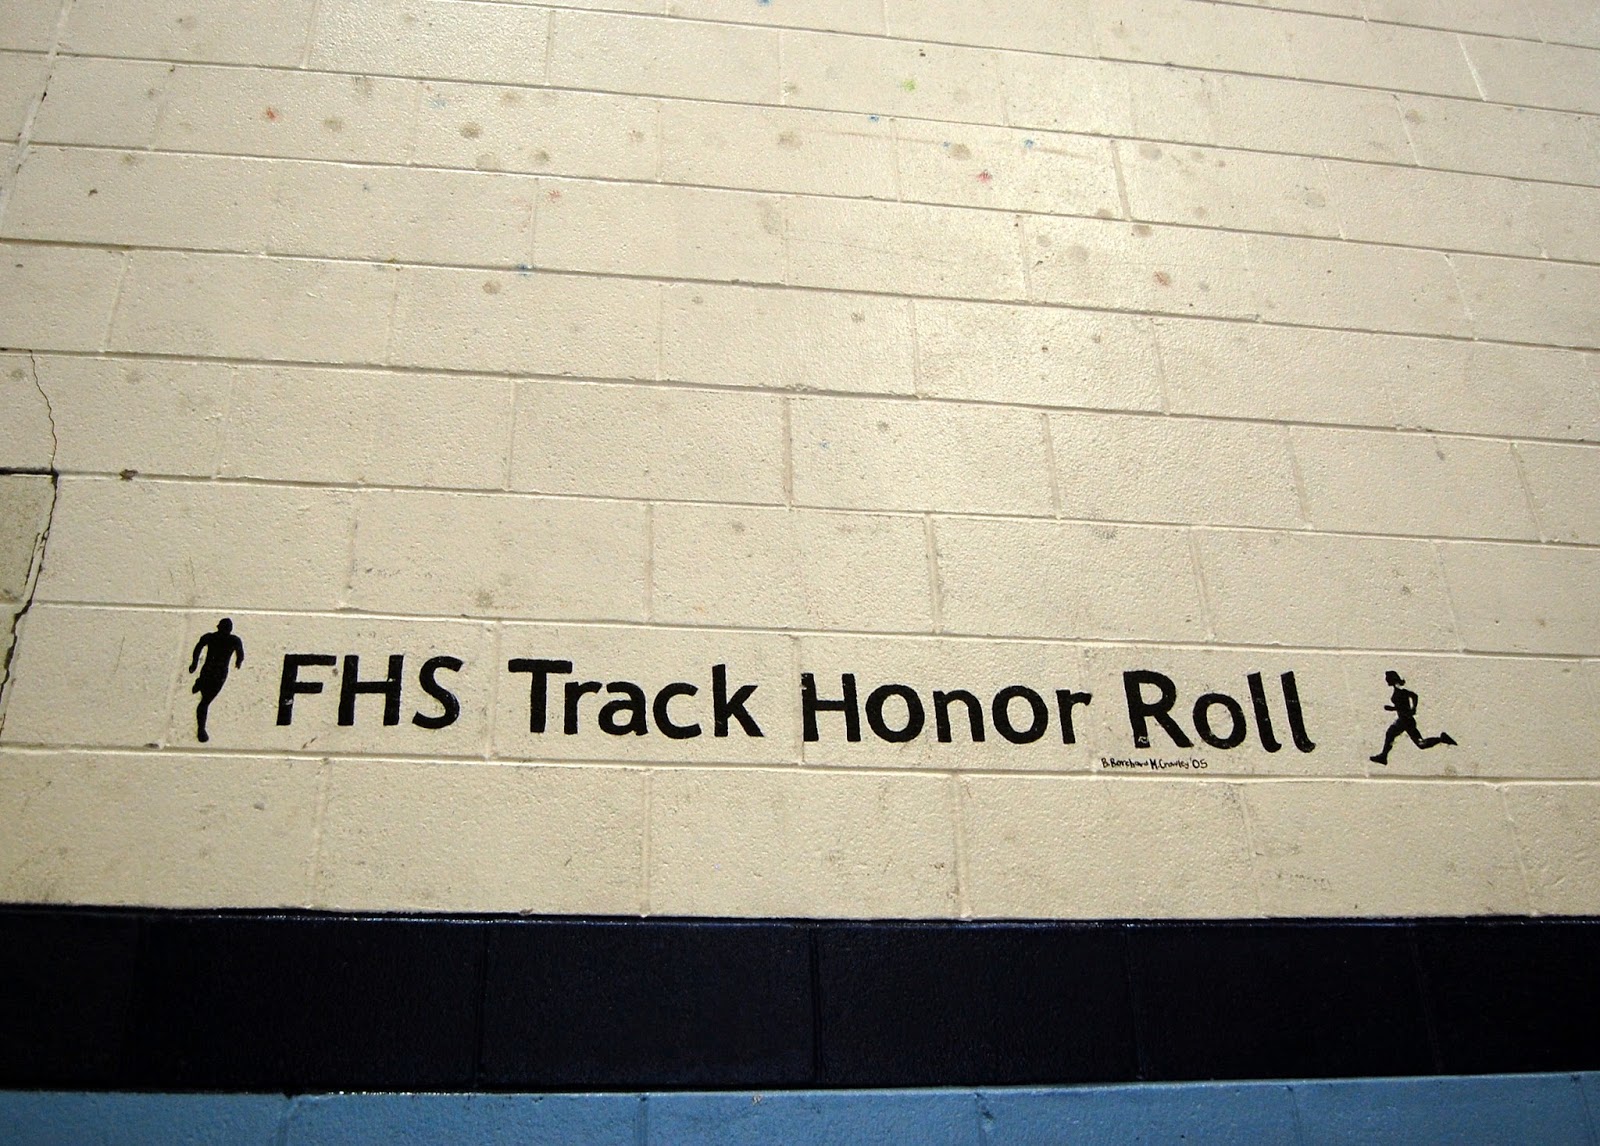 FHS Track Honor Roll placeholder